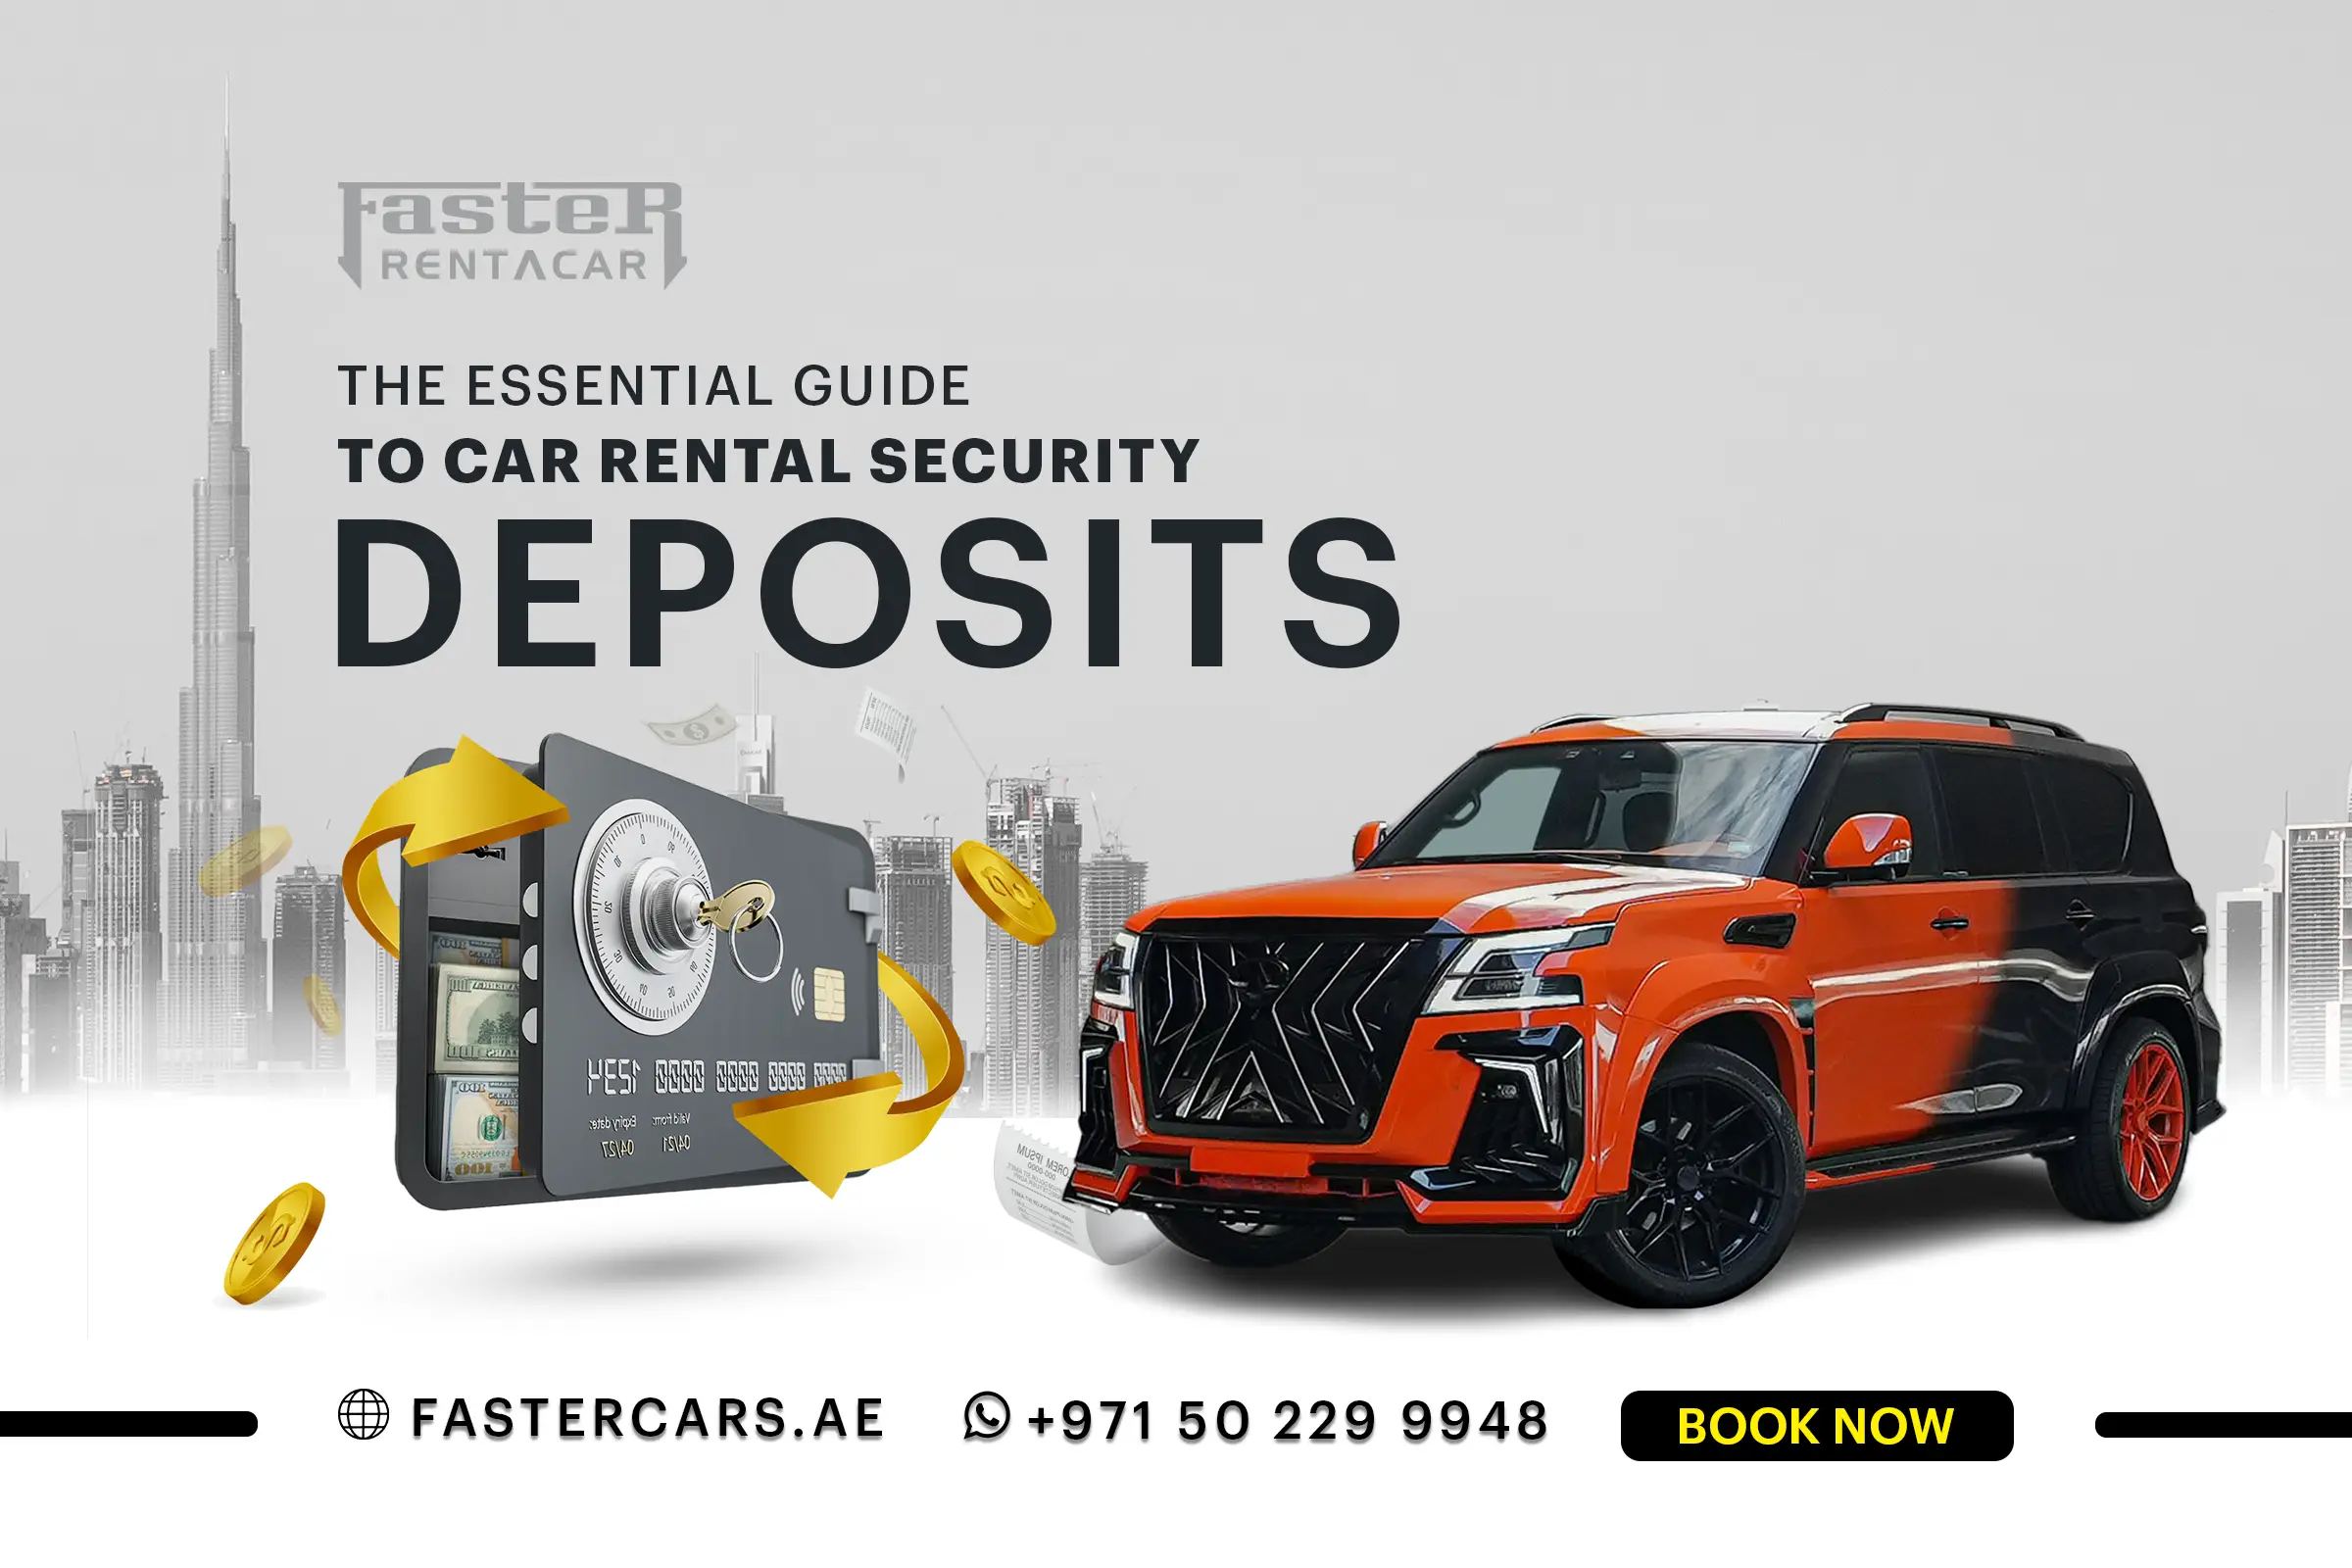 The Essential Guide to Car Rental Security Deposits